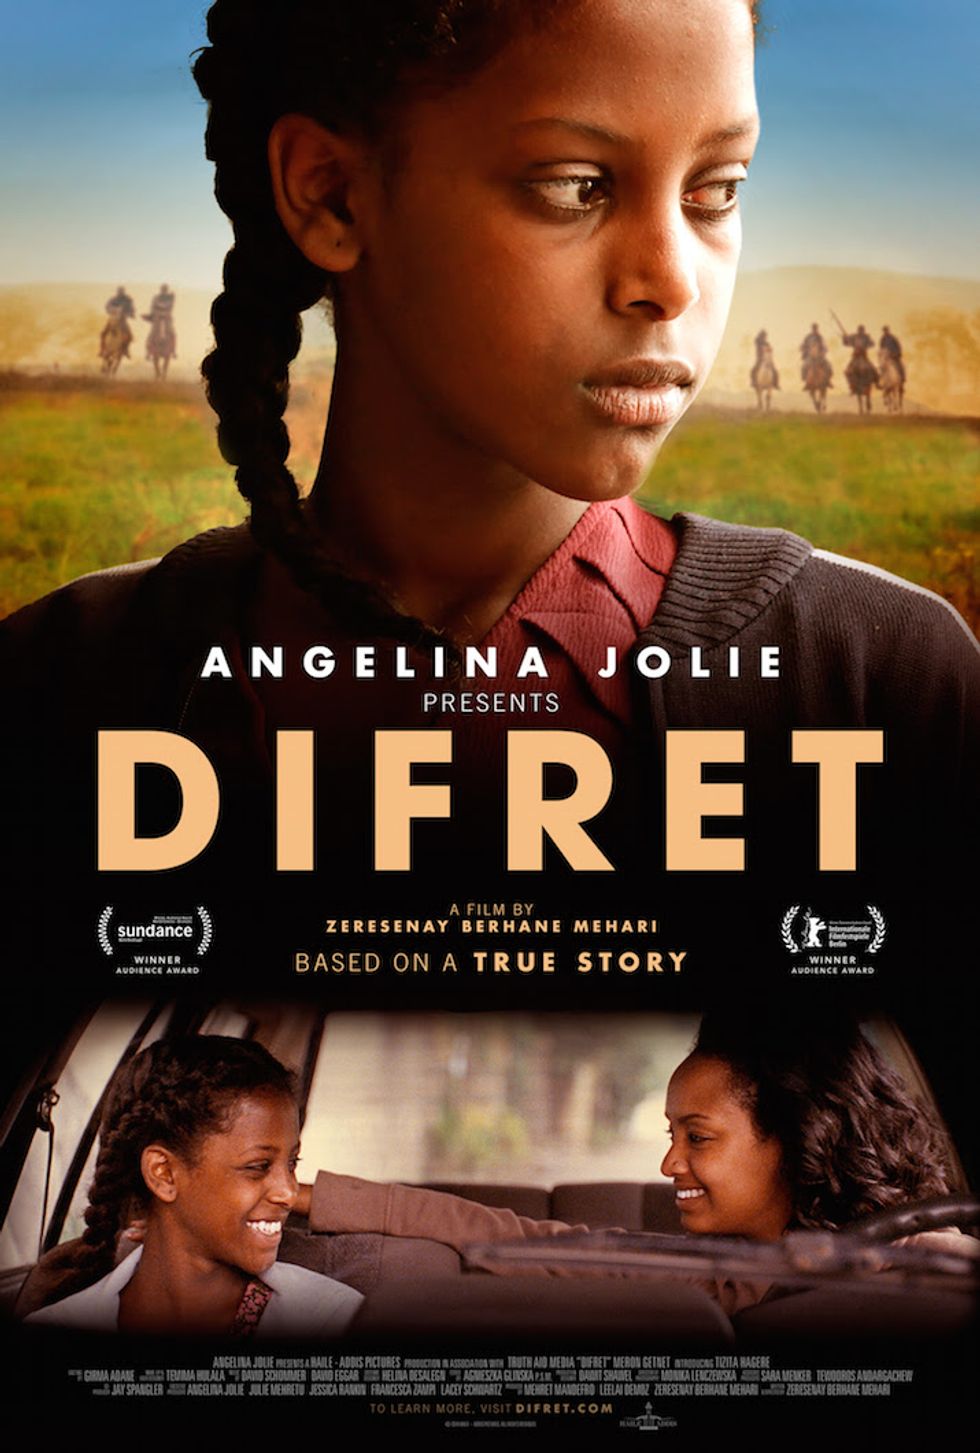 Ethiopian Court Drama 'Difret' Heads To U.S. Theaters In Time For Awards Season